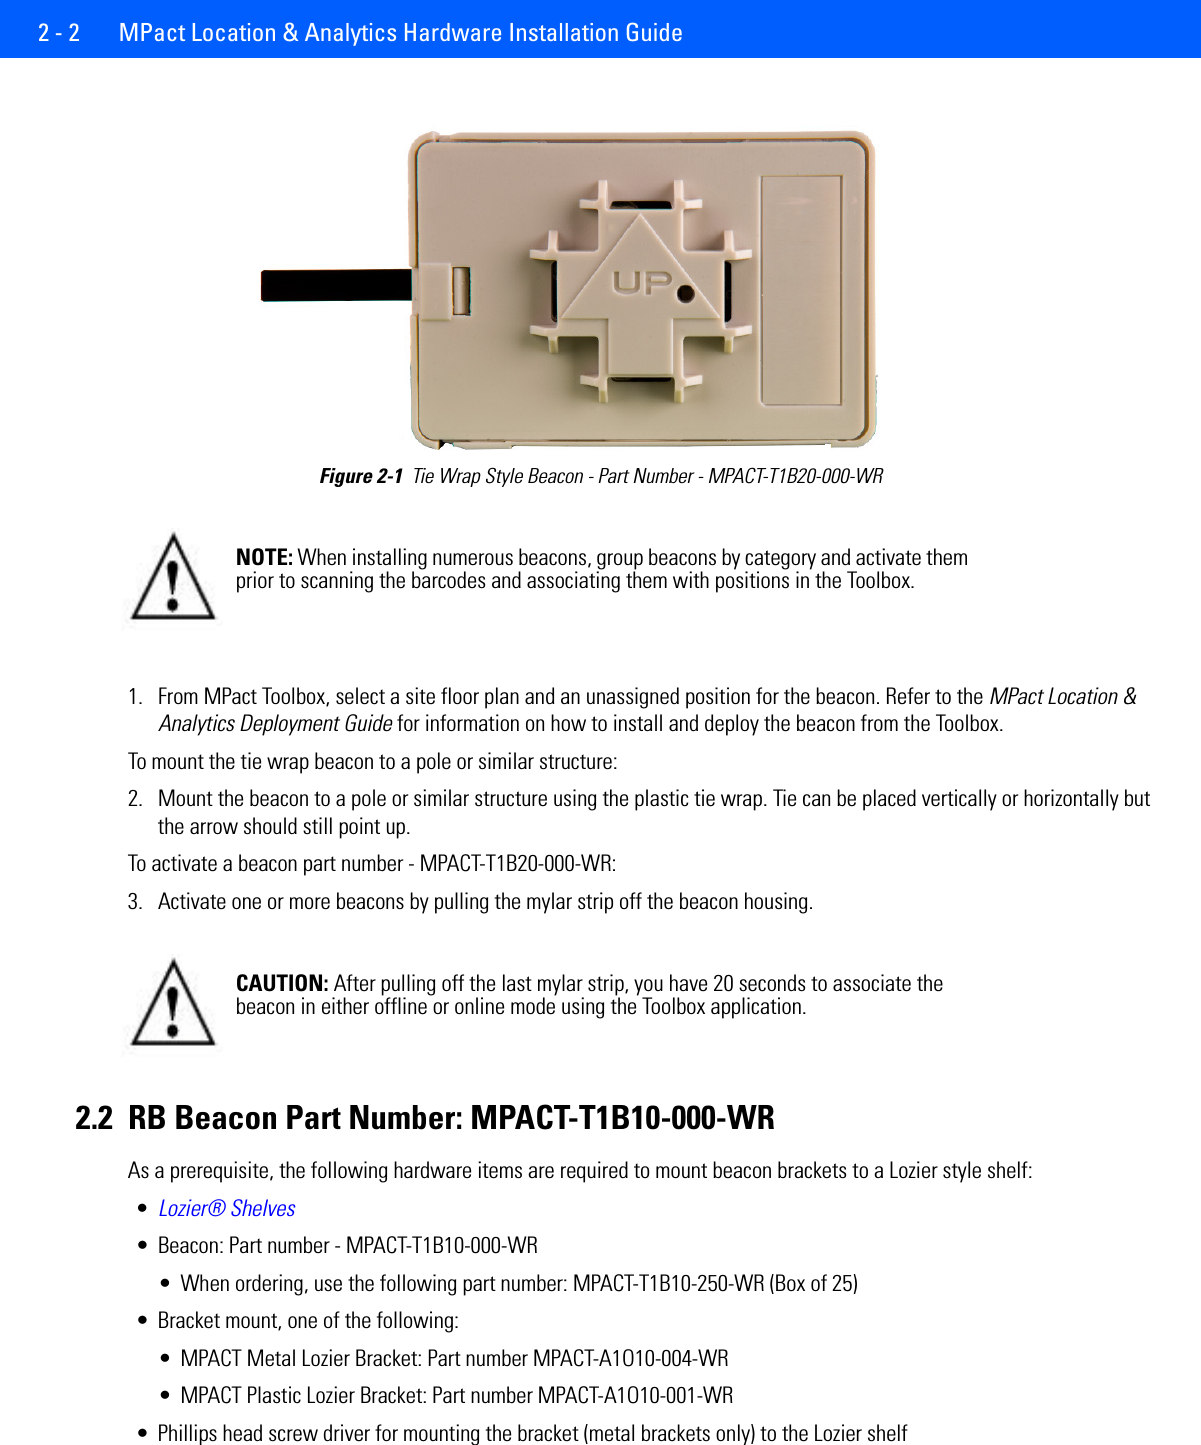 2 - 2  MPact Location &amp; Analytics Hardware Installation GuideFigure 2-1  Tie Wrap Style Beacon - Part Number - MPACT-T1B20-000-WR 1. From MPact Toolbox, select a site floor plan and an unassigned position for the beacon. Refer to the MPact Location &amp; Analytics Deployment Guide for information on how to install and deploy the beacon from the Toolbox. To mount the tie wrap beacon to a pole or similar structure:2. Mount the beacon to a pole or similar structure using the plastic tie wrap. Tie can be placed vertically or horizontally but the arrow should still point up. To activate a beacon part number - MPACT-T1B20-000-WR: 3. Activate one or more beacons by pulling the mylar strip off the beacon housing. 2.2 RB Beacon Part Number: MPACT-T1B10-000-WRAs a prerequisite, the following hardware items are required to mount beacon brackets to a Lozier style shelf:•Lozier® Shelves• Beacon: Part number - MPACT-T1B10-000-WR• When ordering, use the following part number: MPACT-T1B10-250-WR (Box of 25)• Bracket mount, one of the following:• MPACT Metal Lozier Bracket: Part number MPACT-A1O10-004-WR• MPACT Plastic Lozier Bracket: Part number MPACT-A1O10-001-WR• Phillips head screw driver for mounting the bracket (metal brackets only) to the Lozier shelfNOTE: When installing numerous beacons, group beacons by category and activate them prior to scanning the barcodes and associating them with positions in the Toolbox. CAUTION: After pulling off the last mylar strip, you have 20 seconds to associate the beacon in either offline or online mode using the Toolbox application. 